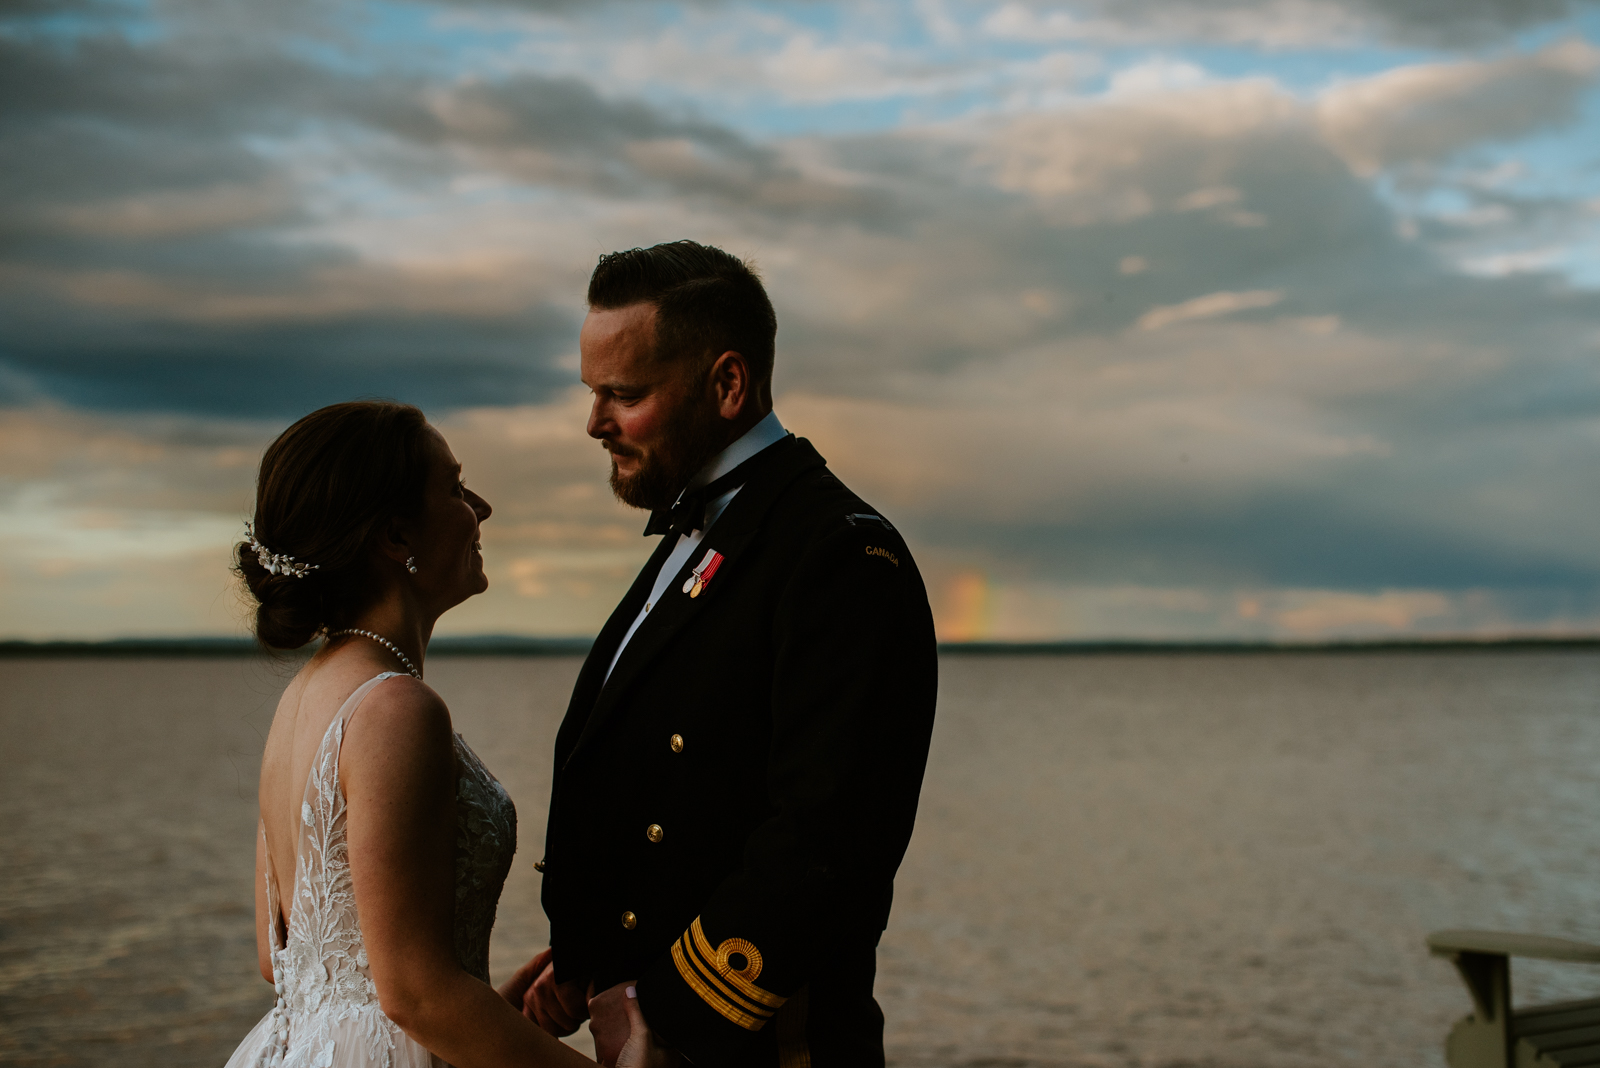 bride and groom wearing navy uniform by the water at sunset with a rainbow